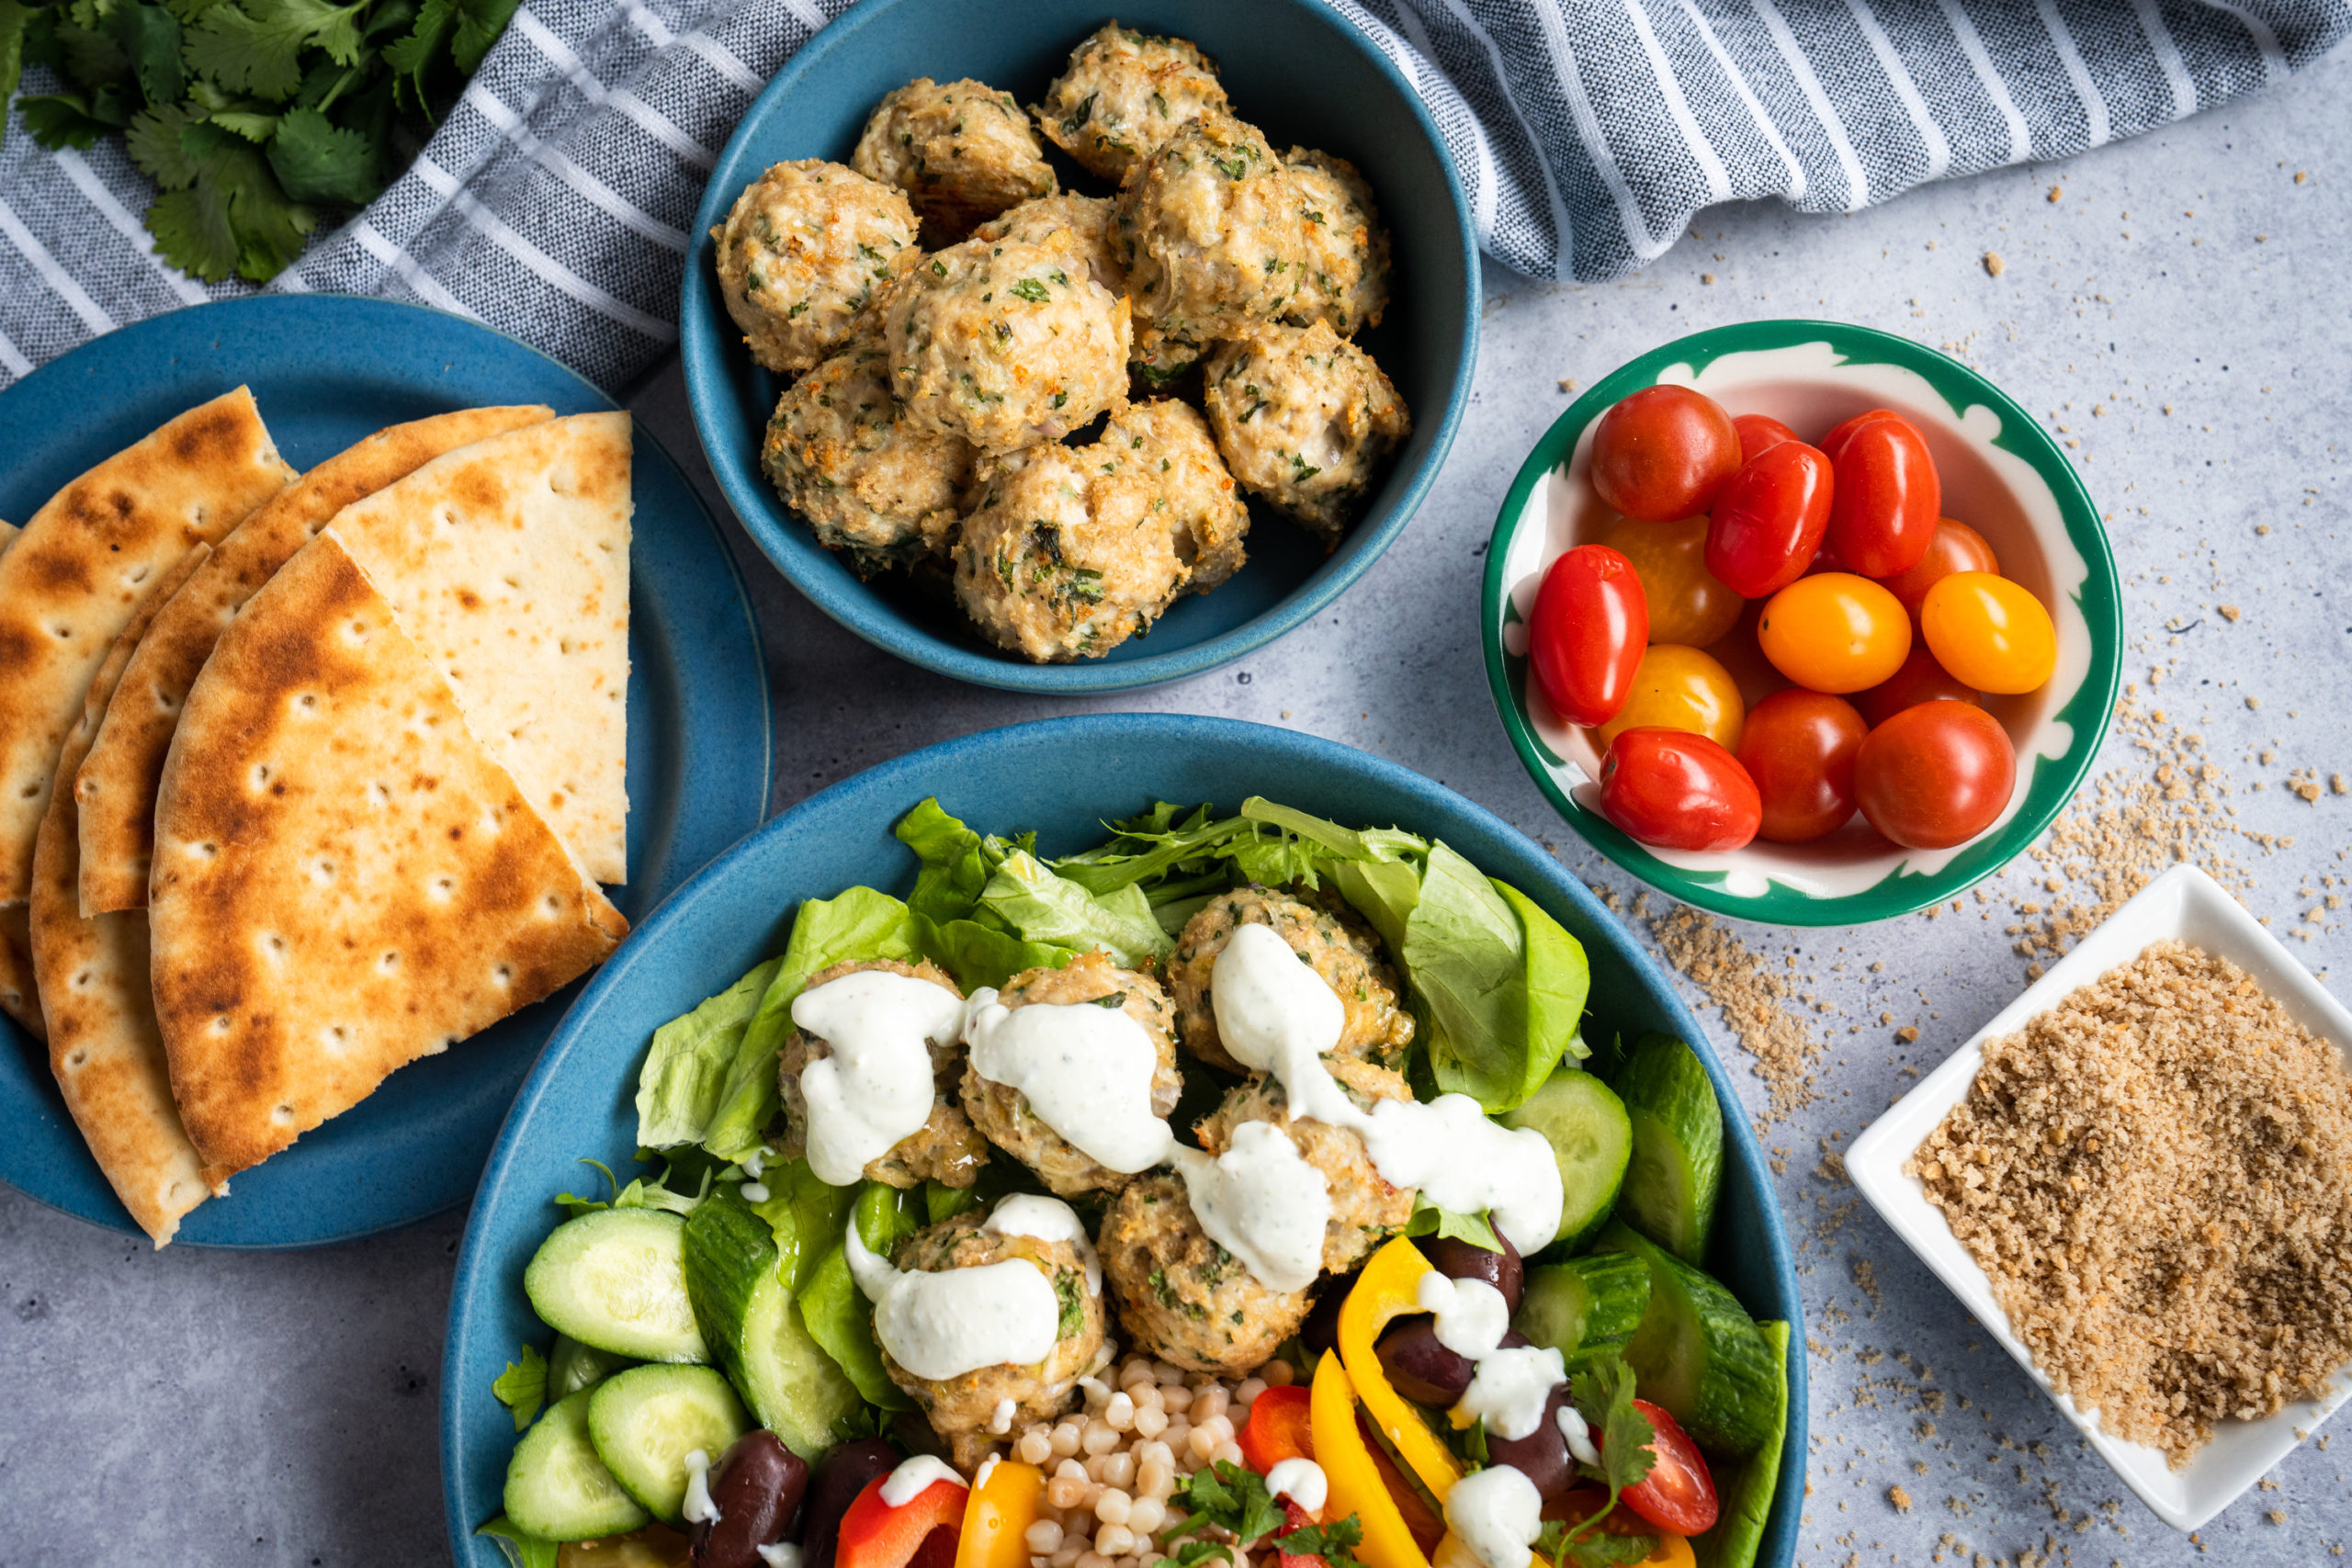 Greek chicken meatballs served over greens and grains